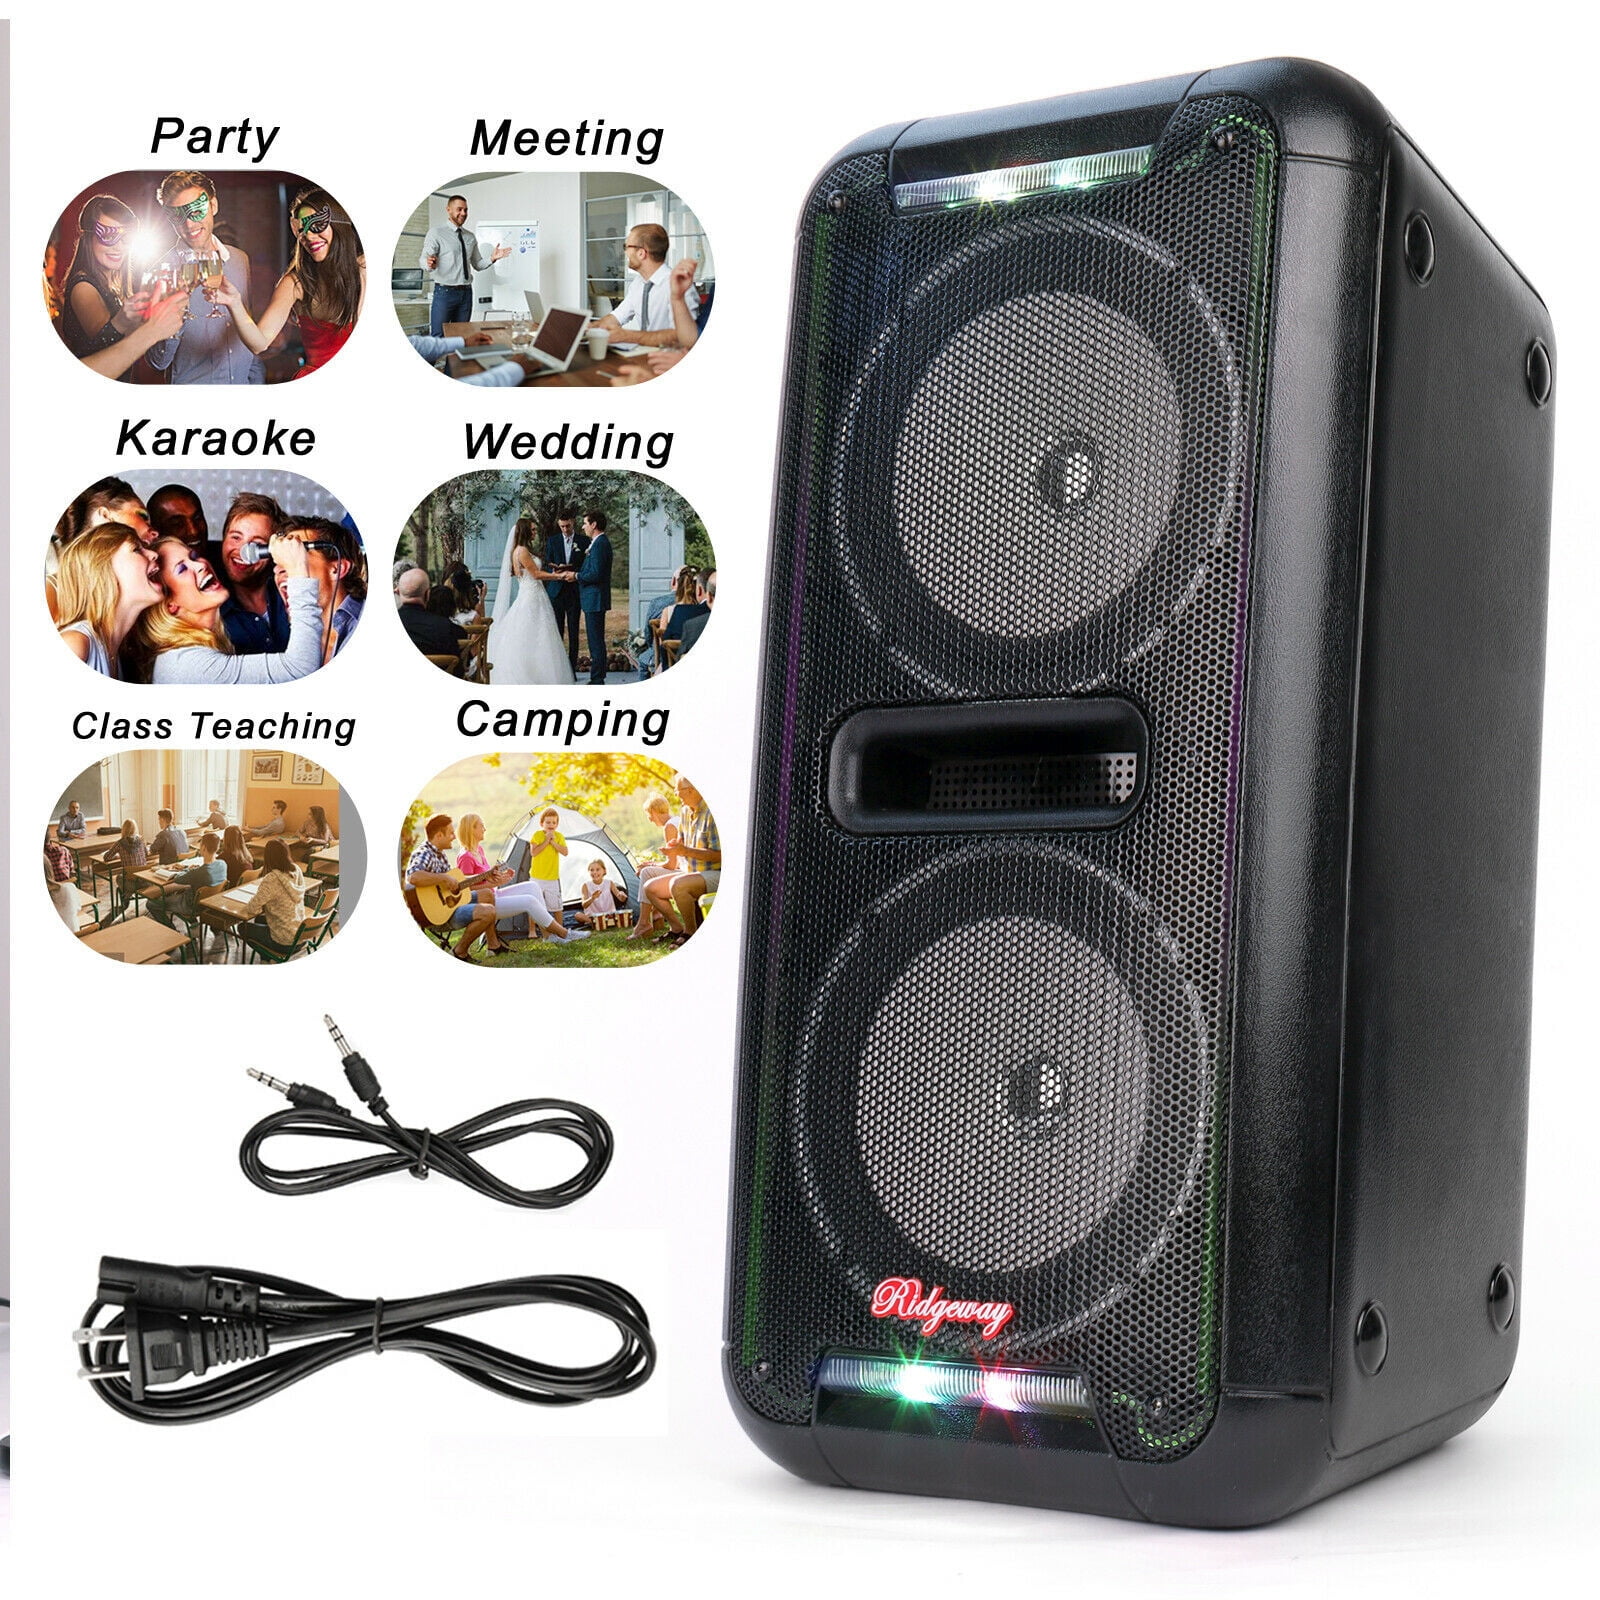 Wireless Portable FM Bluetooth Speaker Subwoofer Heavy Bass Sound System Party 